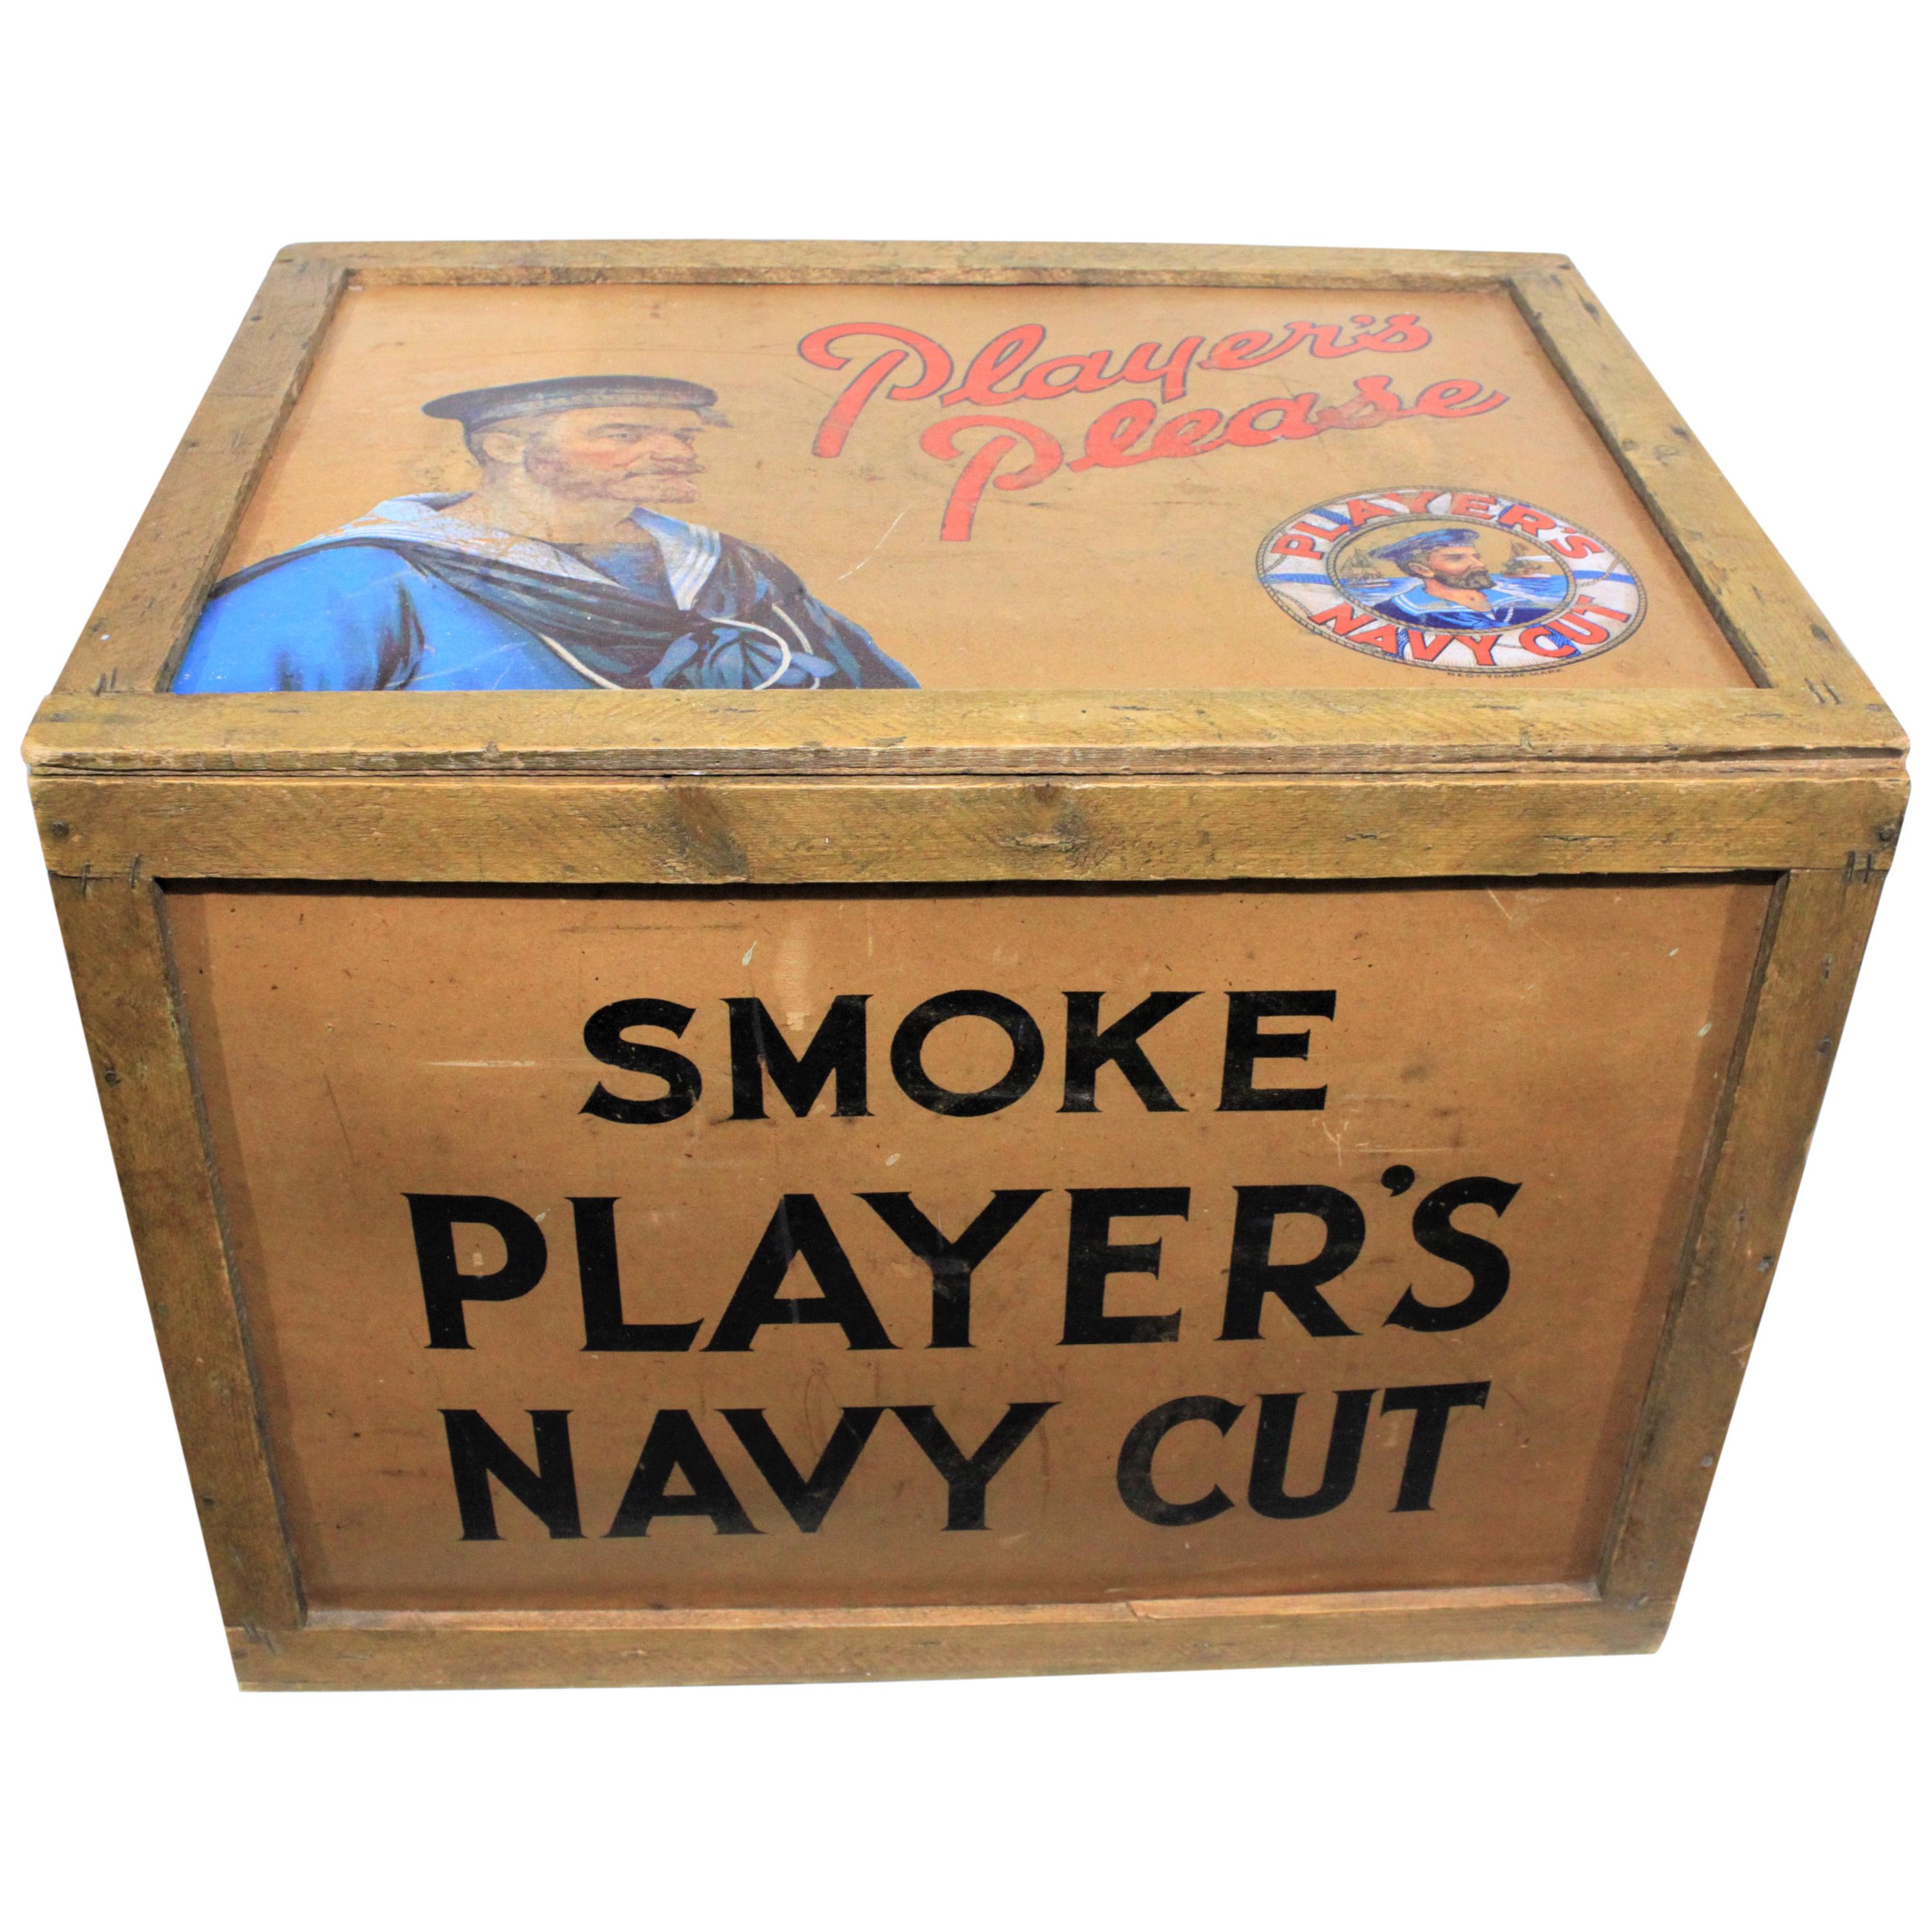 Vintage John Players Navy Cut Cigarette Advertising Shipping Crate or Box